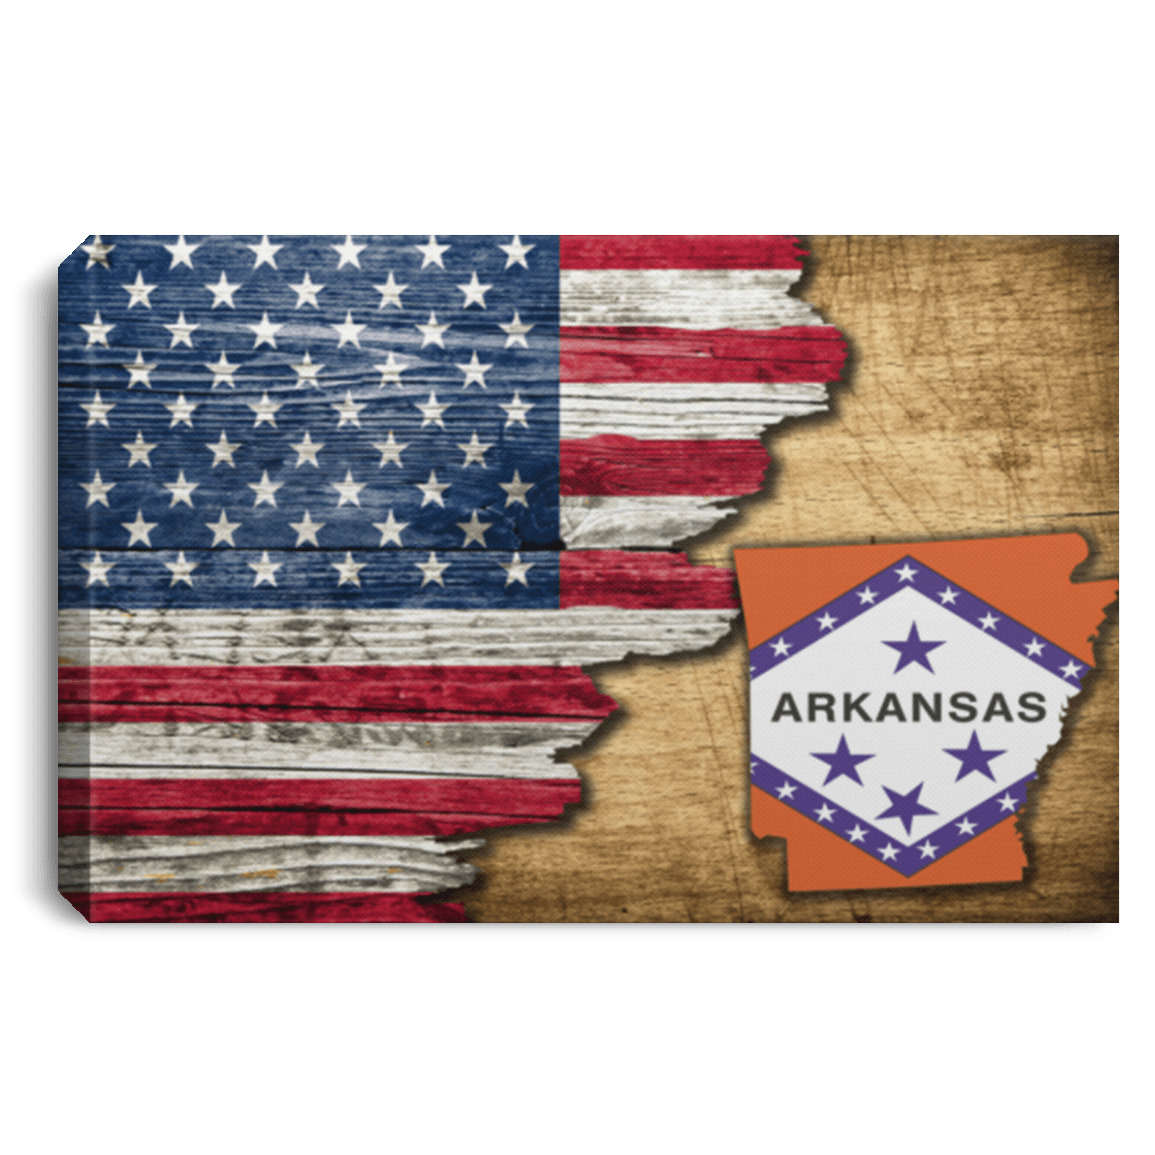 United States/Arkansas Flag Ripped Effect 18X12 Inches Landscape Canvas .75In Frame